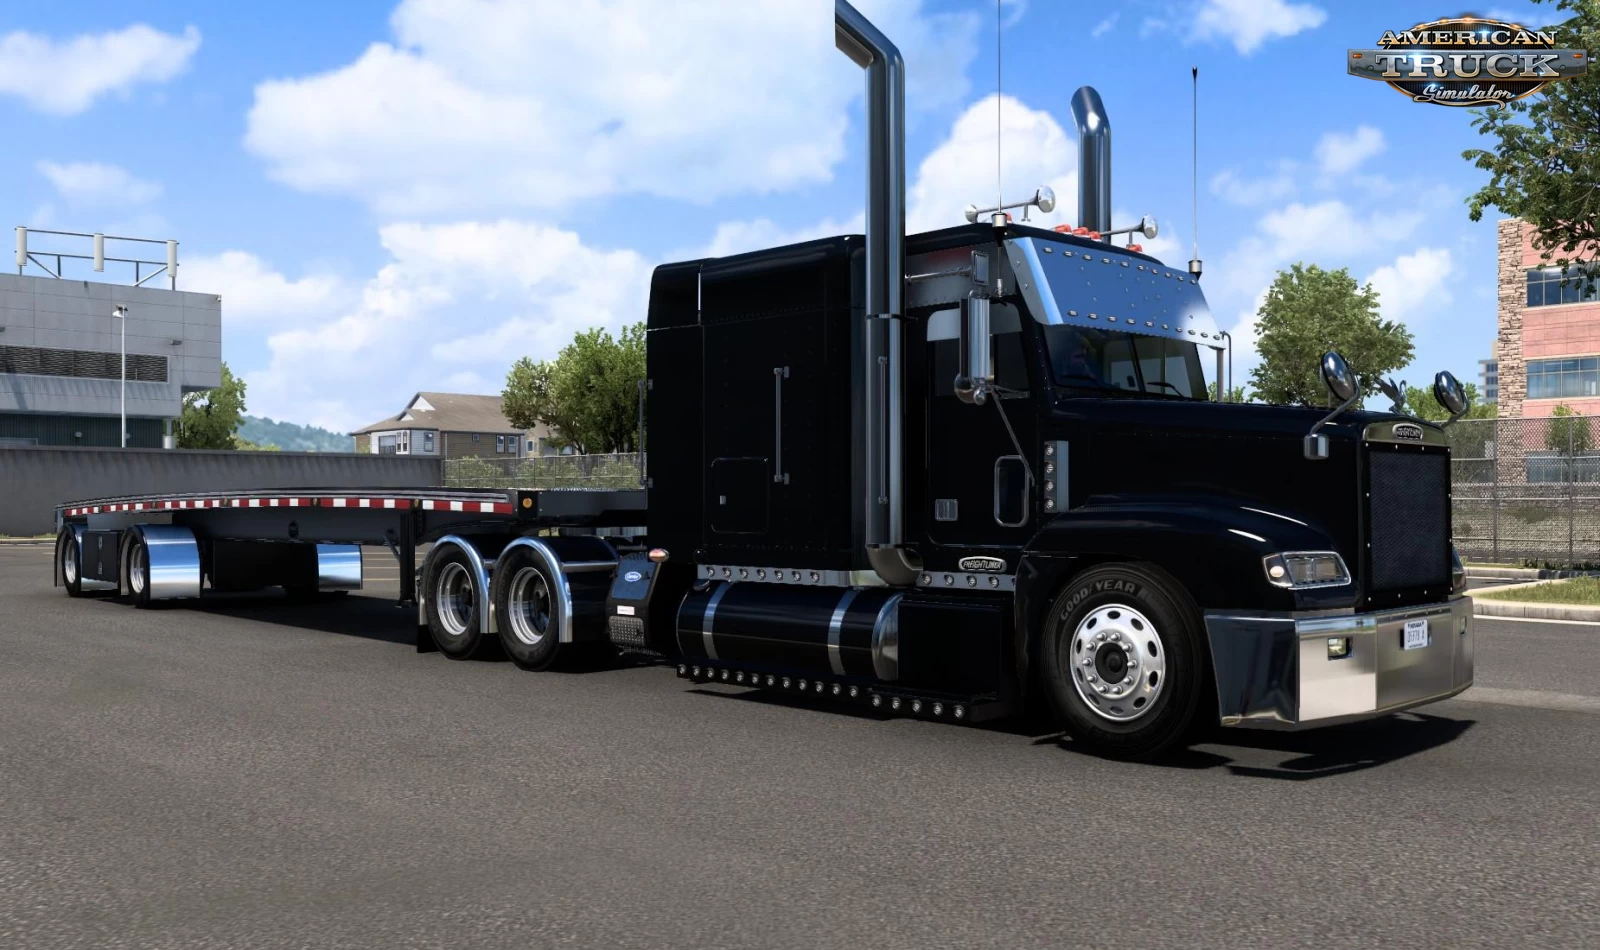 Freightliner FLD Custom v1.6 by ReneNate (1.44.x) for ATS